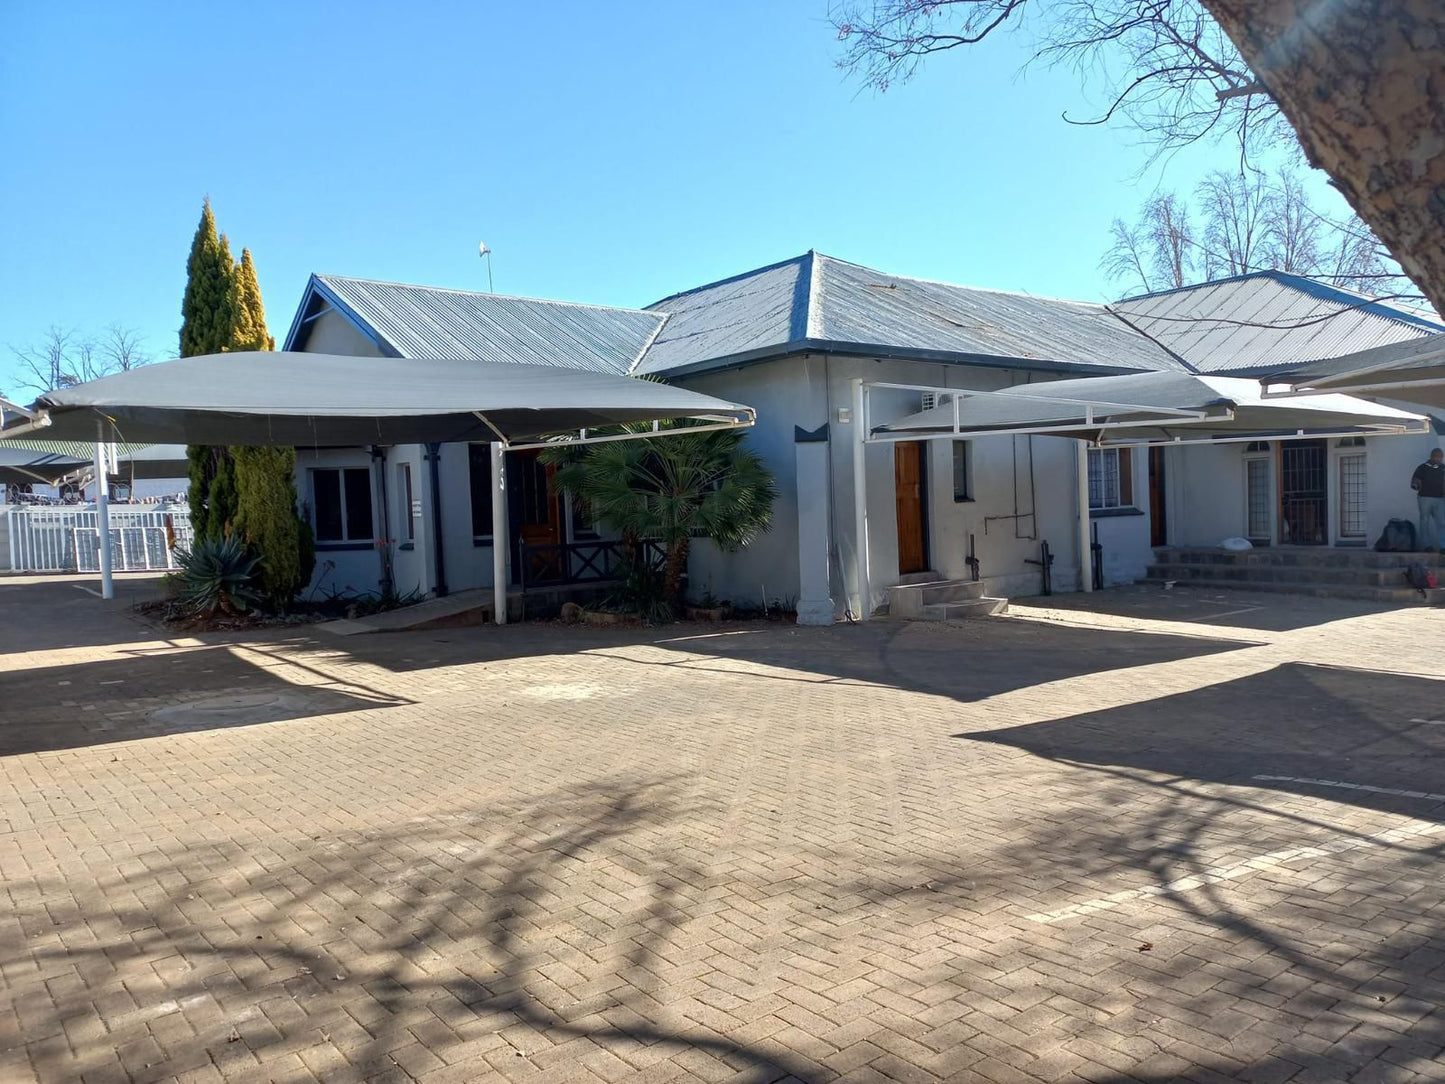 St Eve Lodge And Spa Waverley Bloemfontein Free State South Africa Complementary Colors, House, Building, Architecture